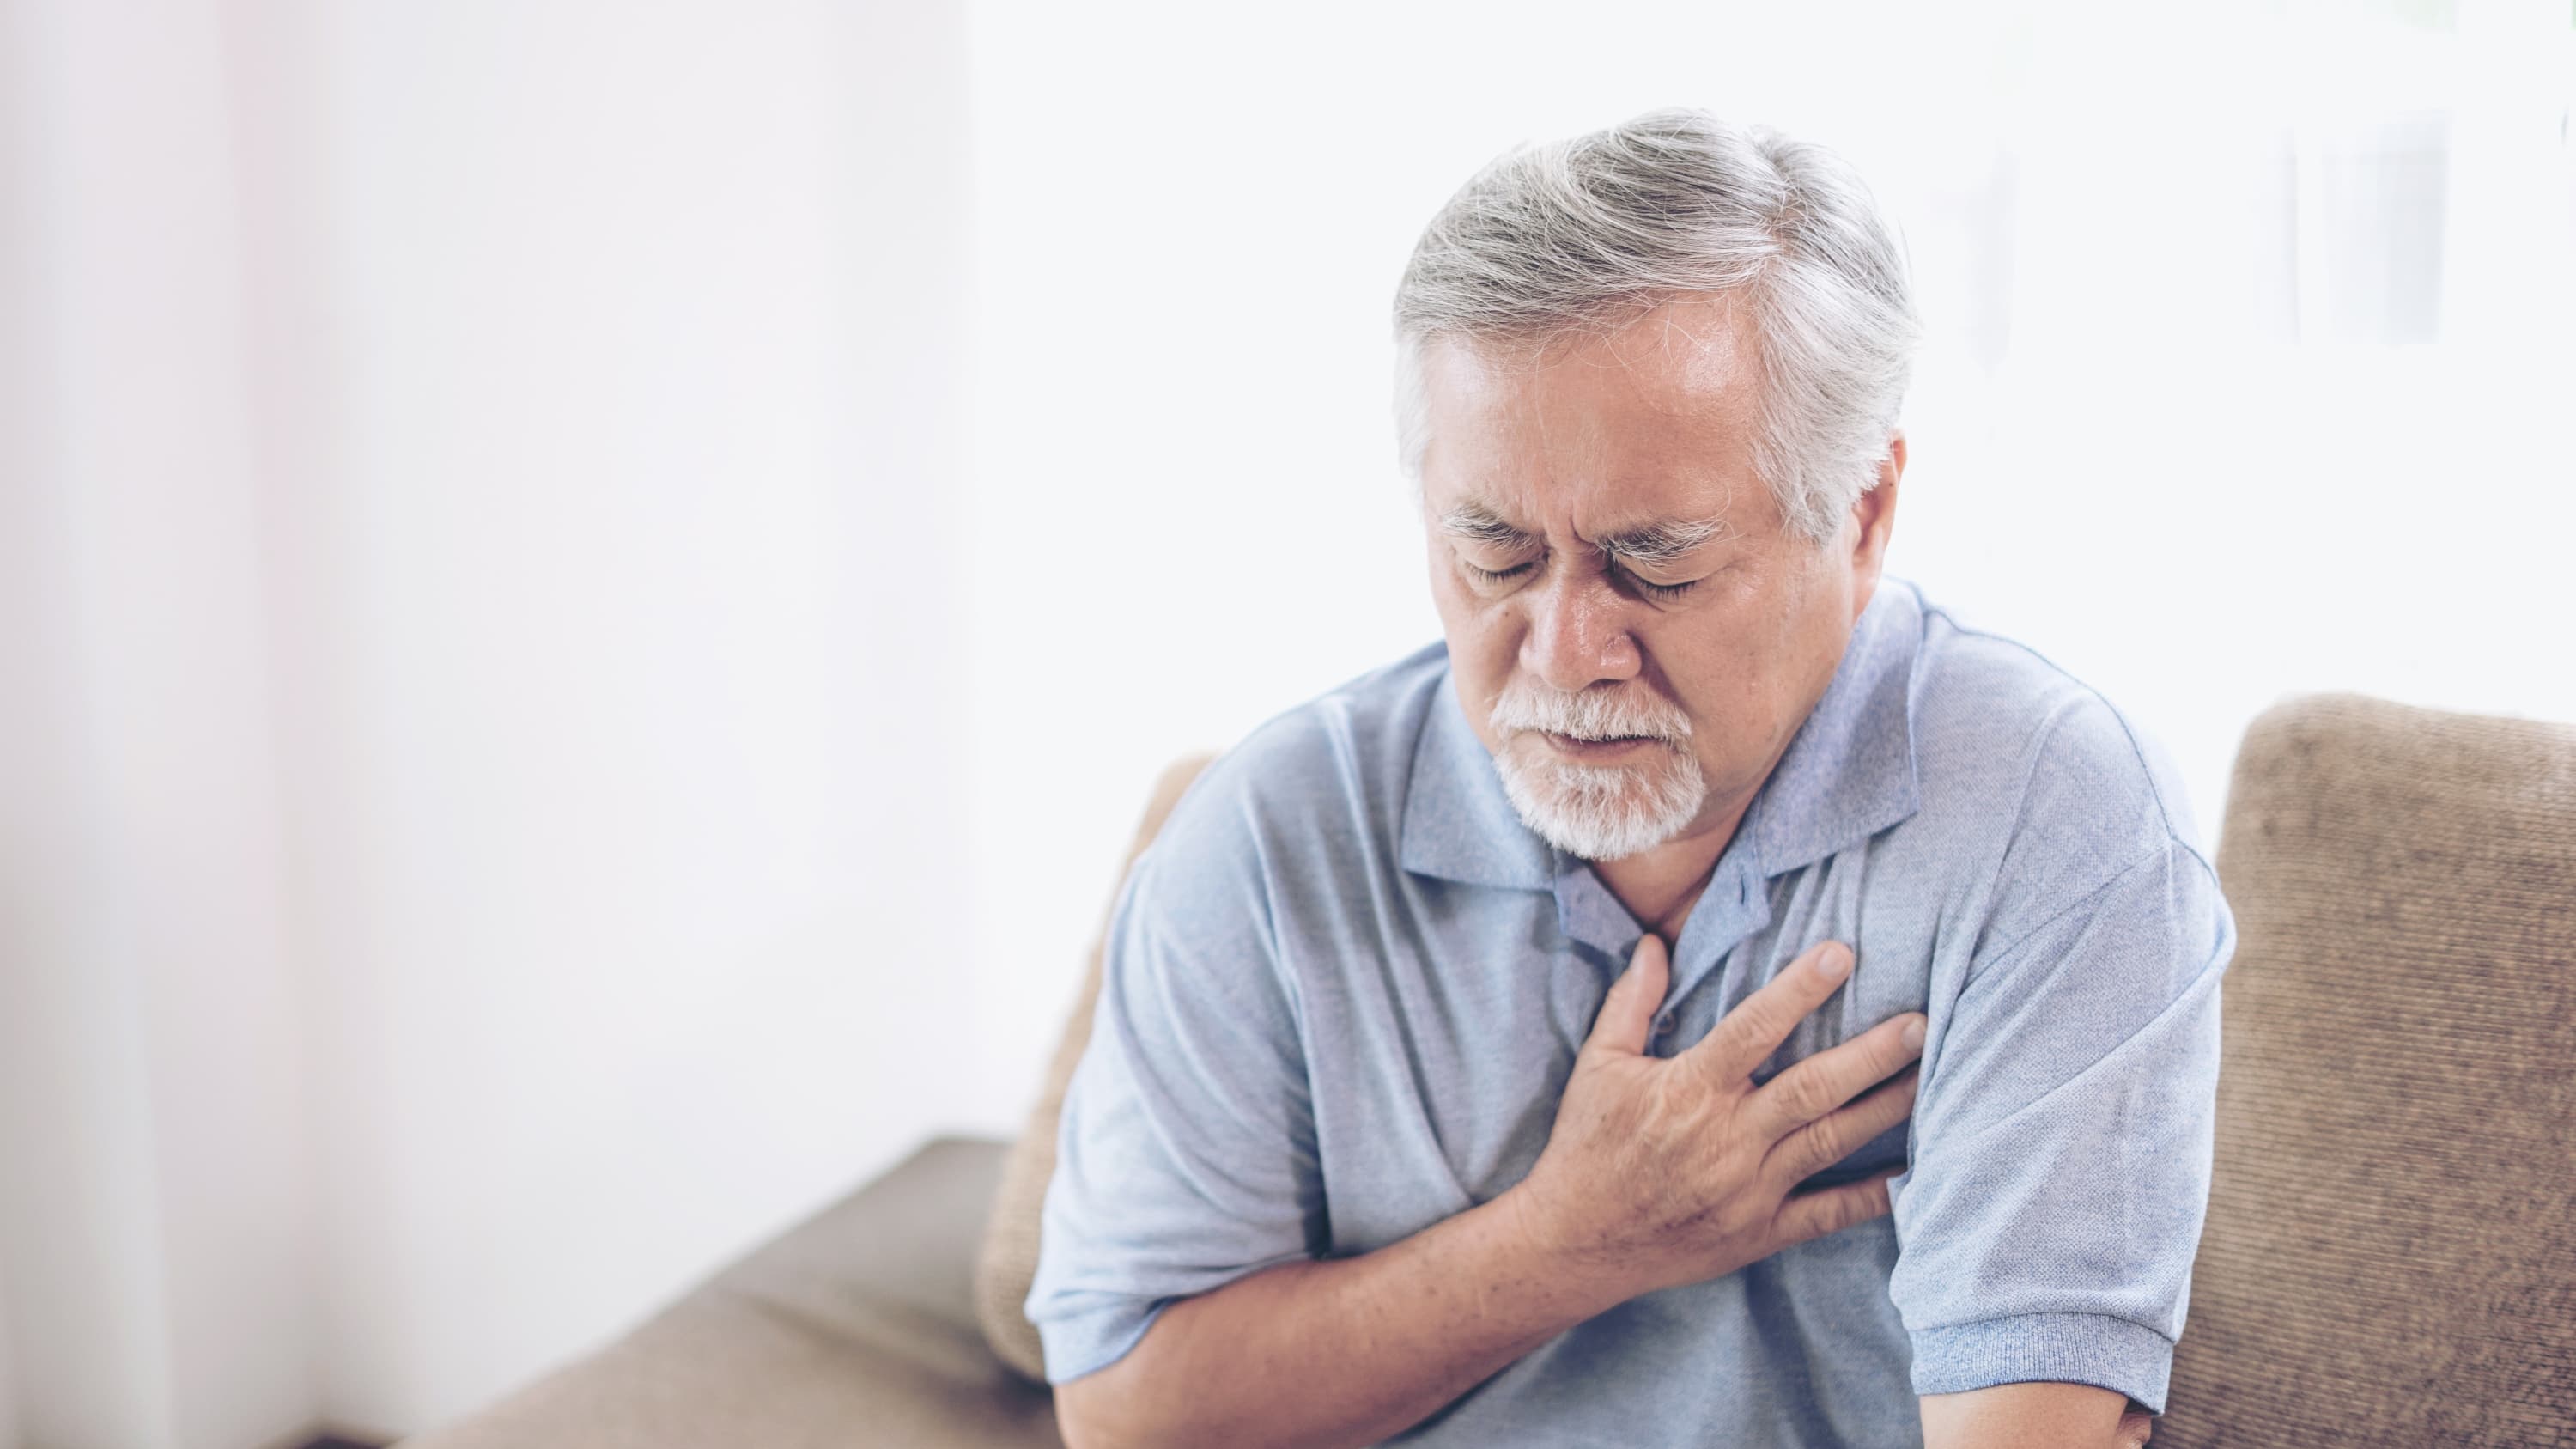 man with chest pain, possibly suffering from cardiac arrest